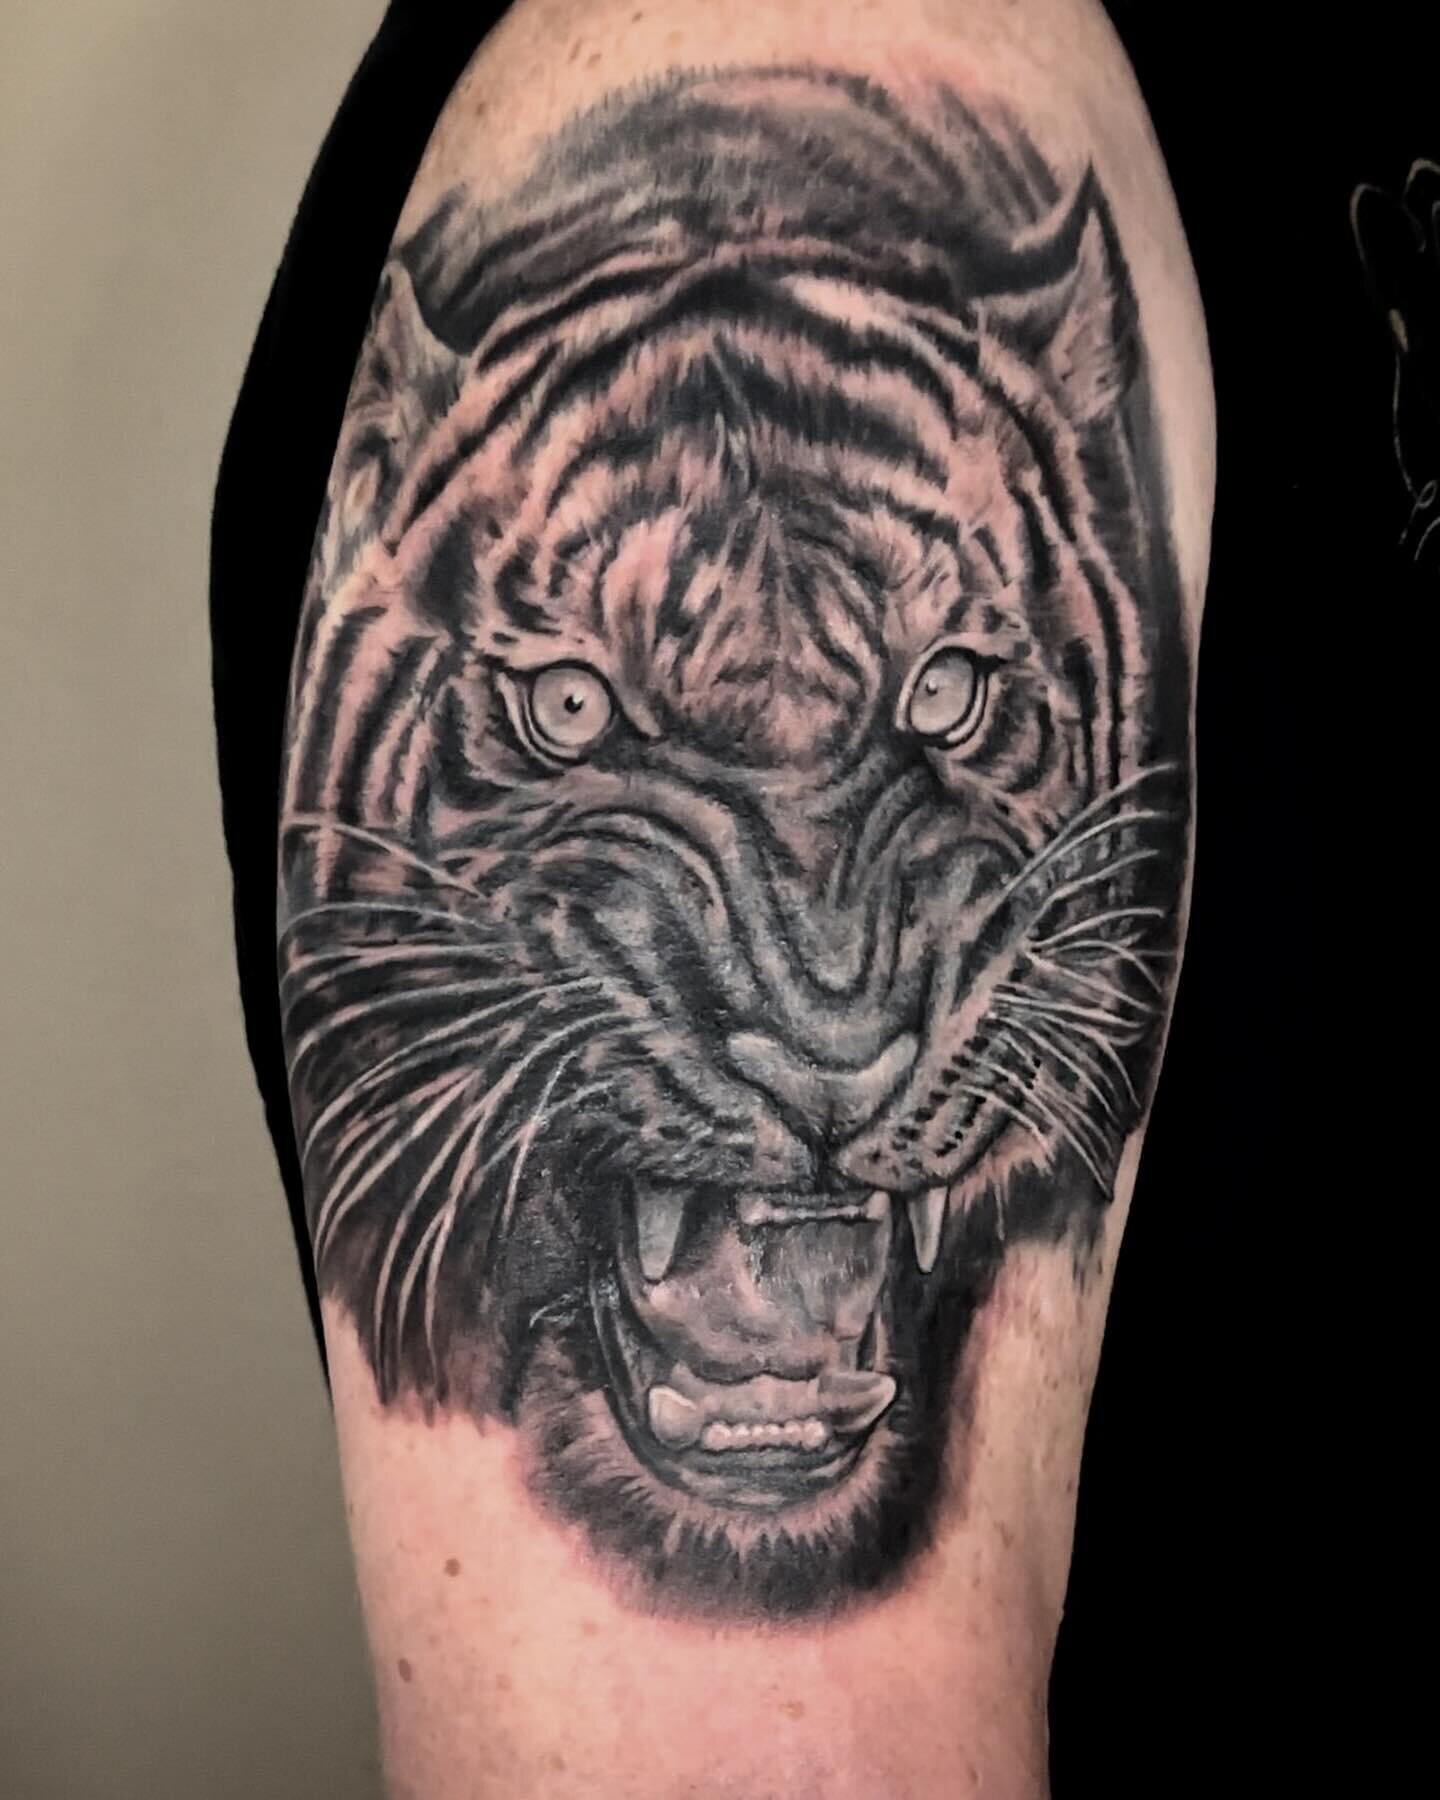 Scar/Tattoo coverup done by yours truly ✨ This piece was such a mission but we got it done!💪🏽🔥 swipe to see the OG😮&zwj;💨 #scarcoveruptattoo #coveruptattoo #coverup #blackandgrey #blacktattoo #realism #tiger #tigertattoo #arkansas #arkansastatto